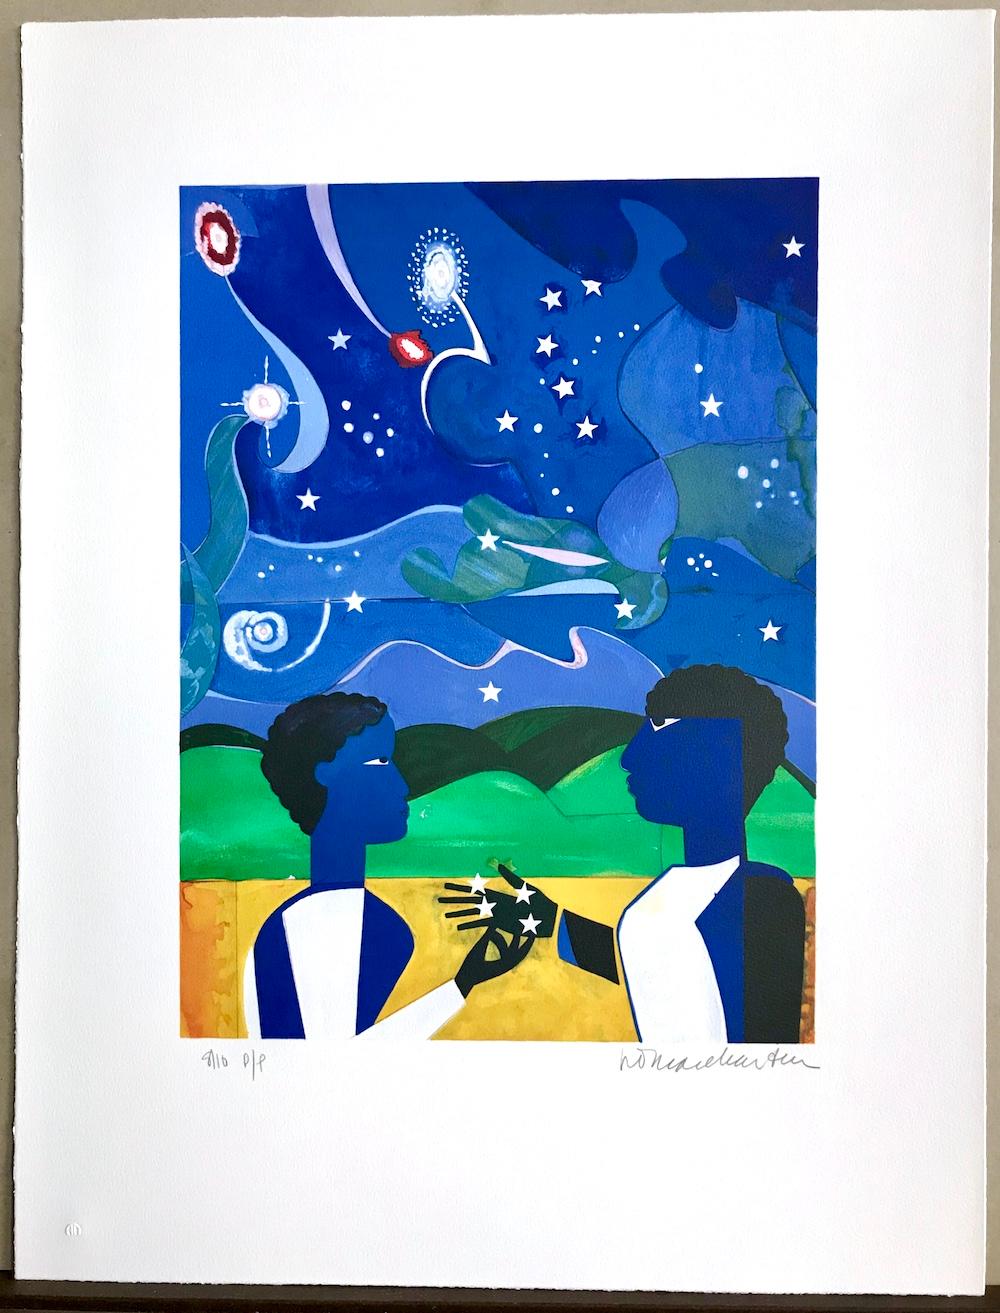 TWO WORLDS, FACES OF THE FUTURE is a hand drawn, limited edition color lithograph printed using hand lithography techniques on archival Arches printmaking paper, 100% acid free, by the renowned American artist Romare Bearden. TWO WORLDS, FACES OF